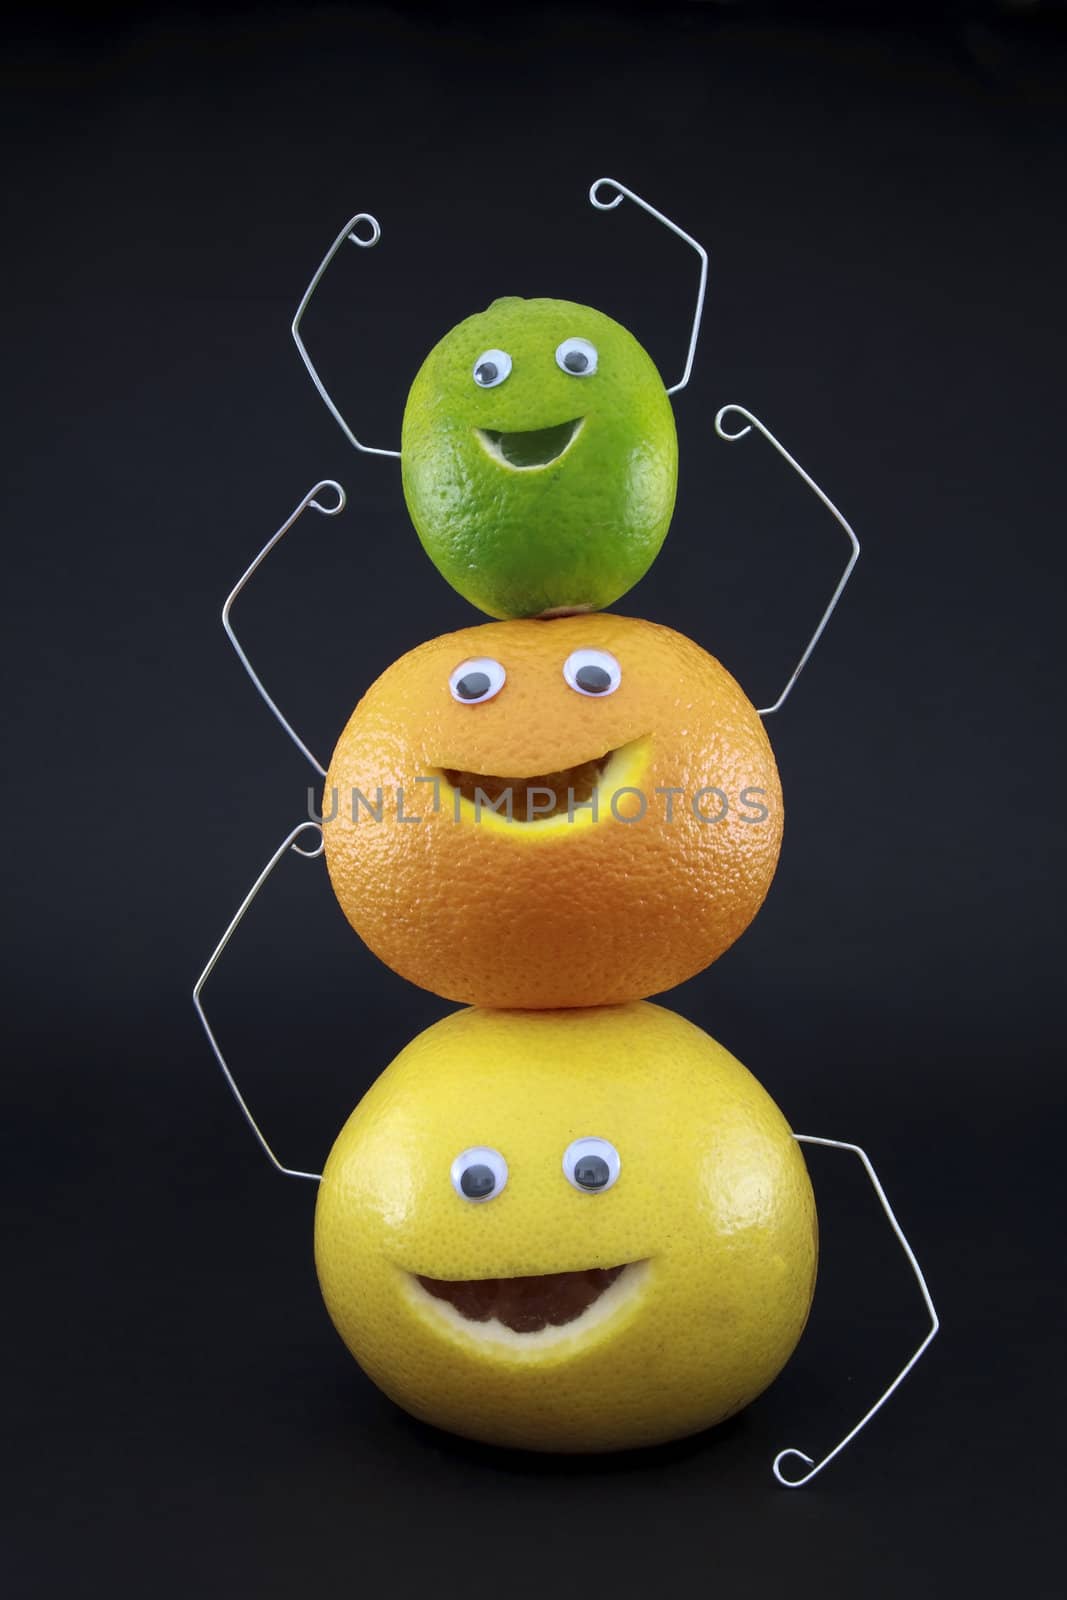 Characters made with three citrus